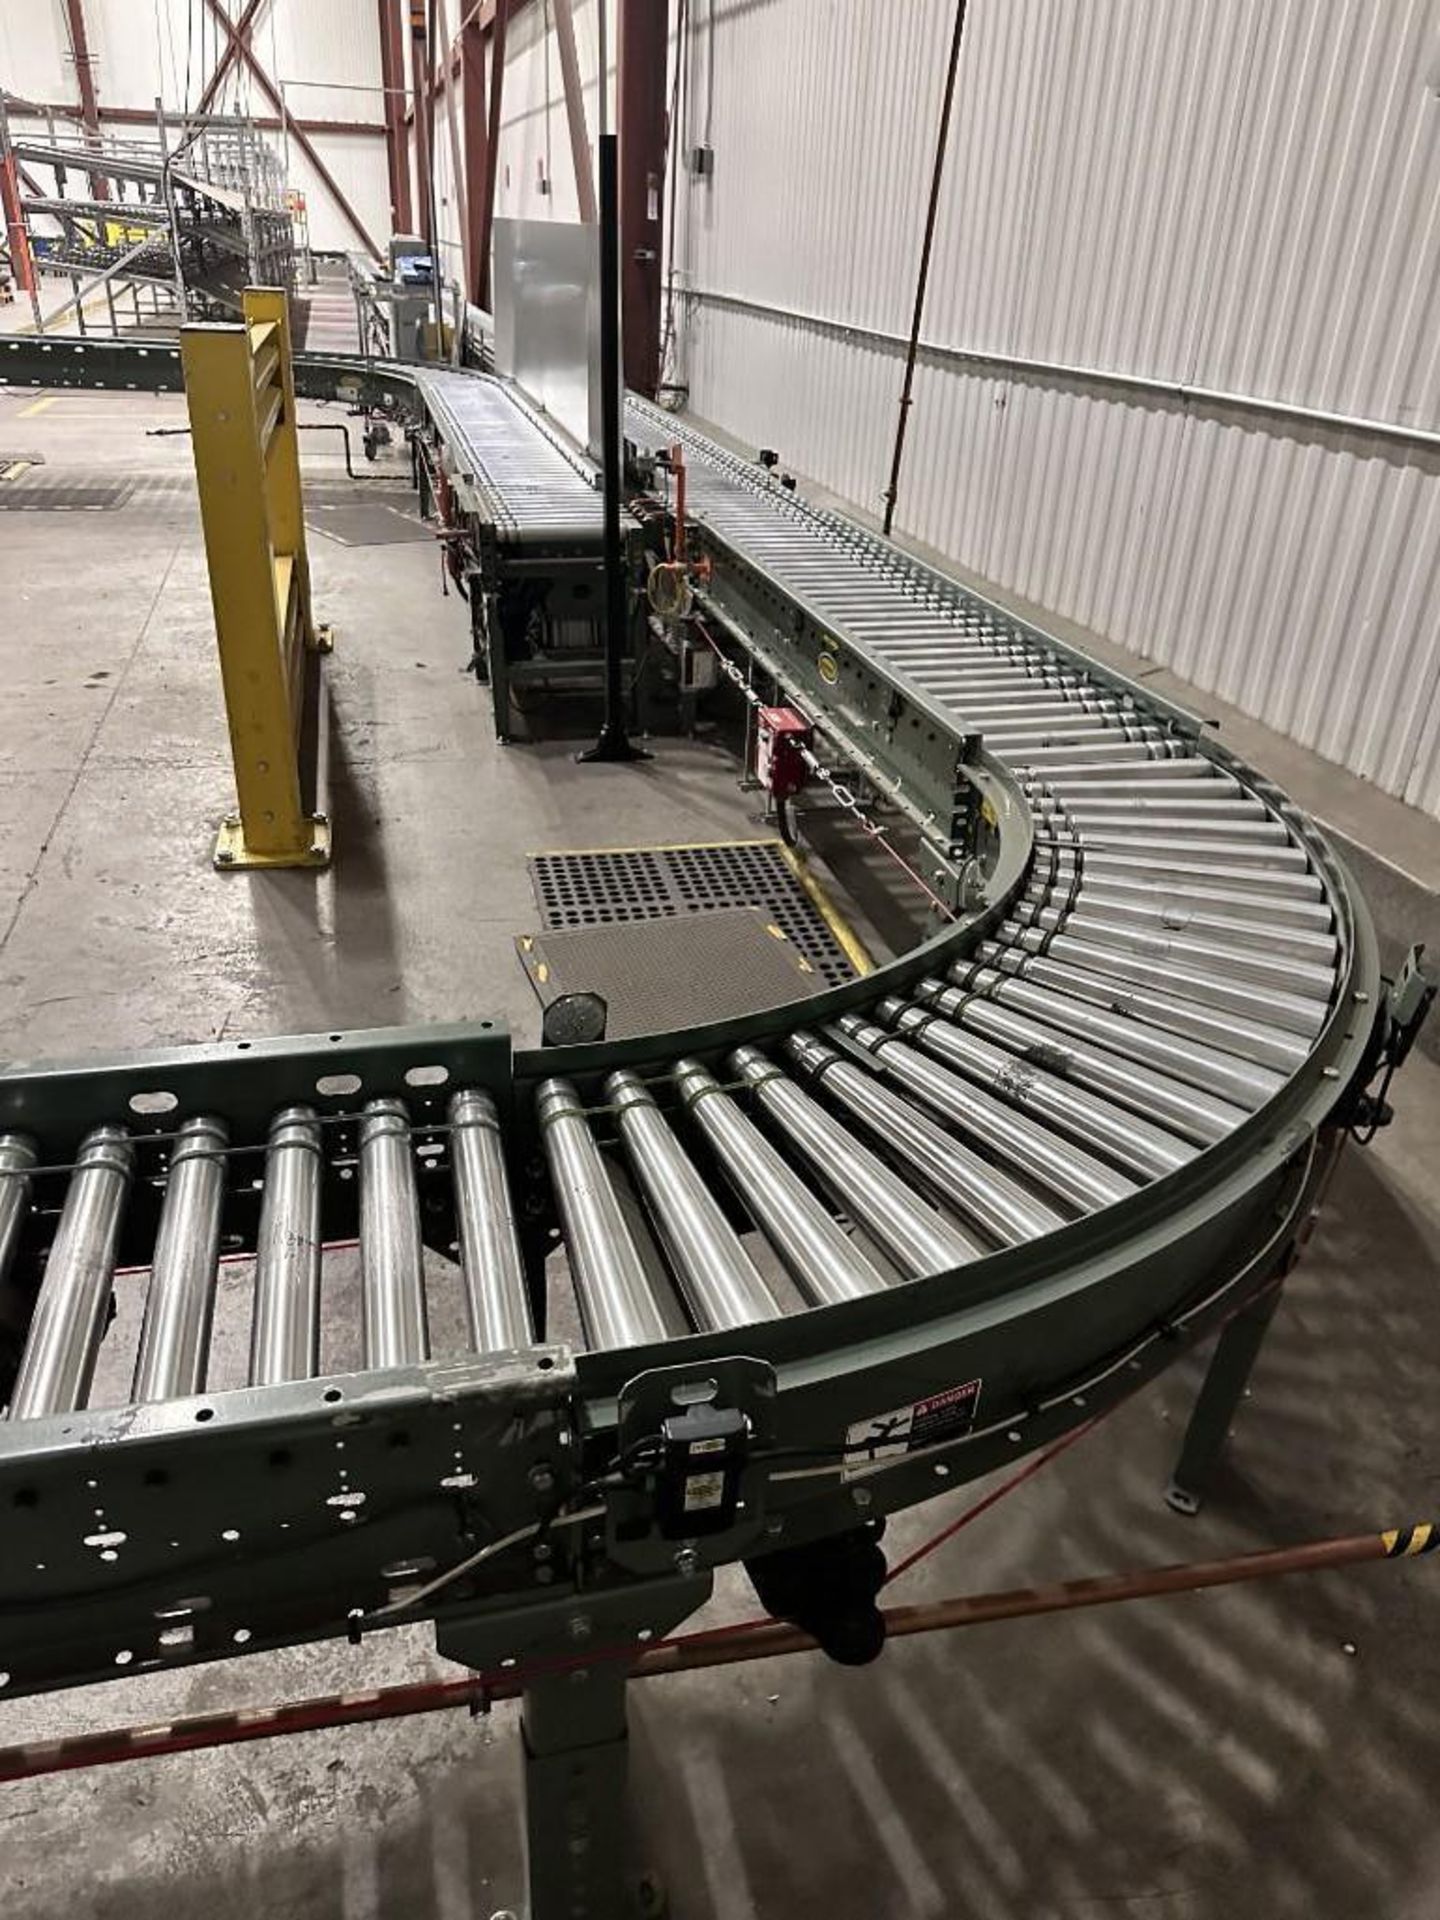 HYTROL POWER CONVEYOR SYSTEM 57 FOOT LONG DRIVEN. WITH BOX SHIFTER - Image 4 of 10